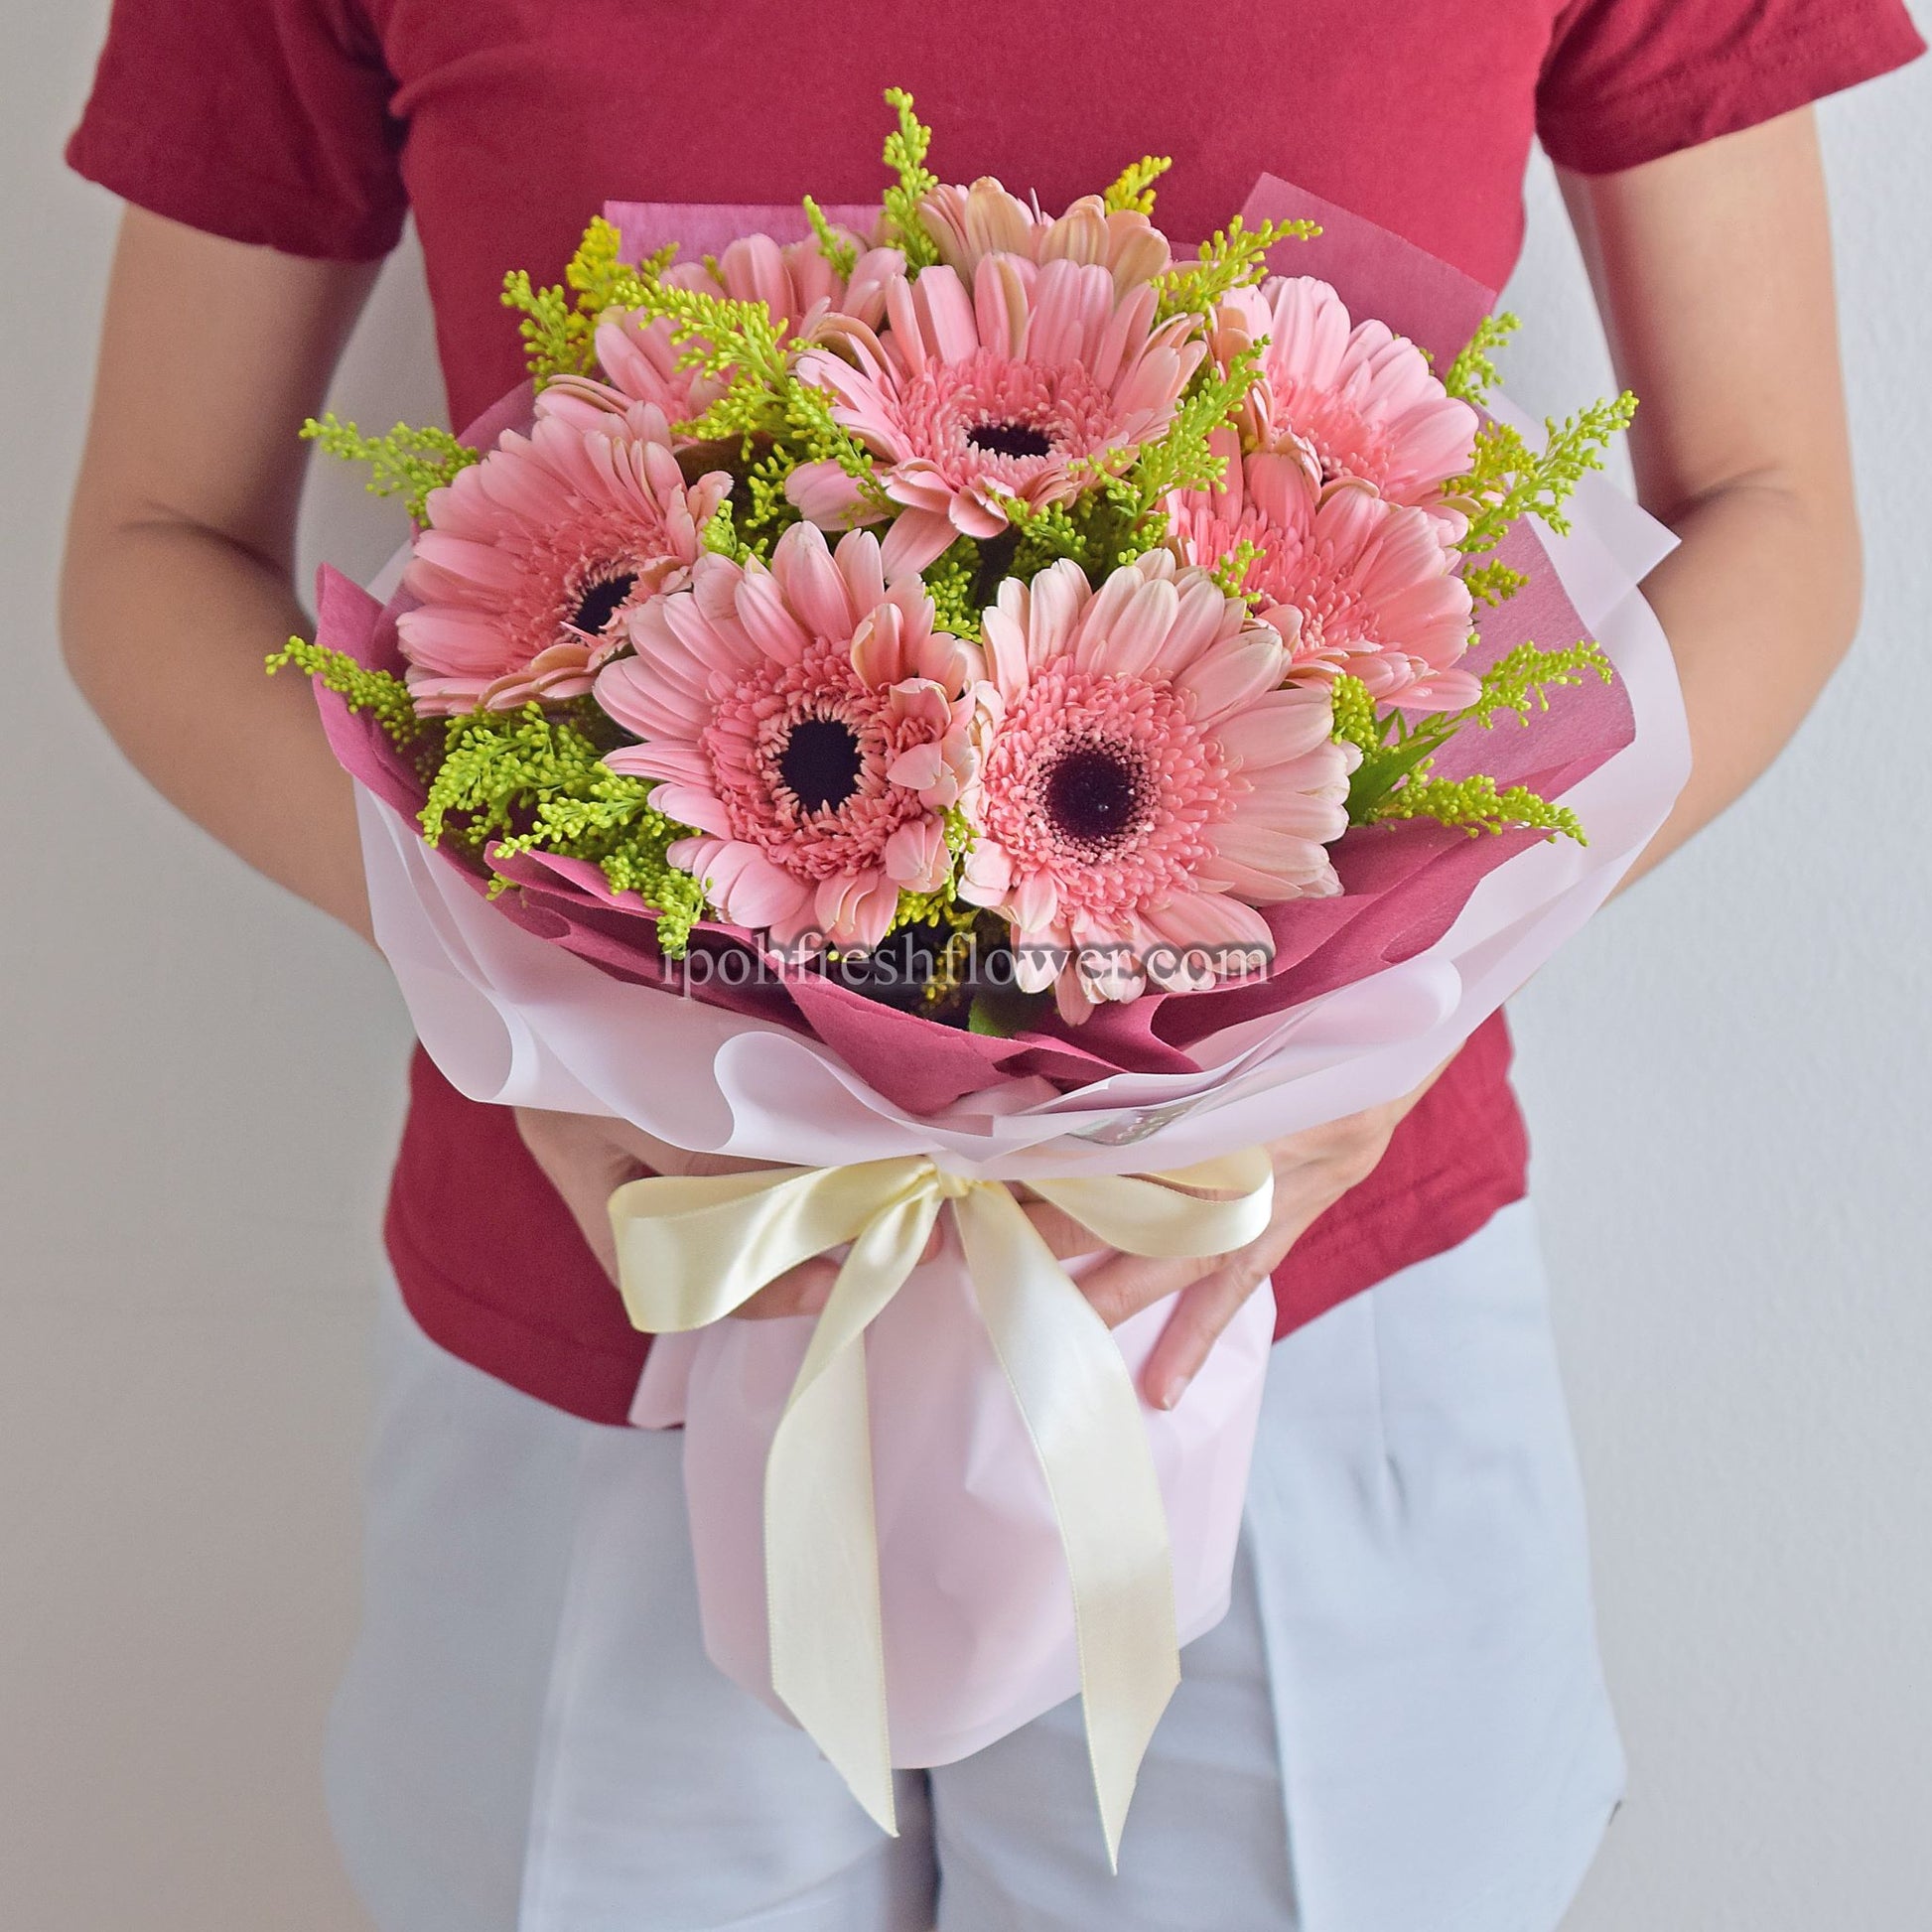 Blush Blooms| Daisy Fresh Flower Bouquet Delivery